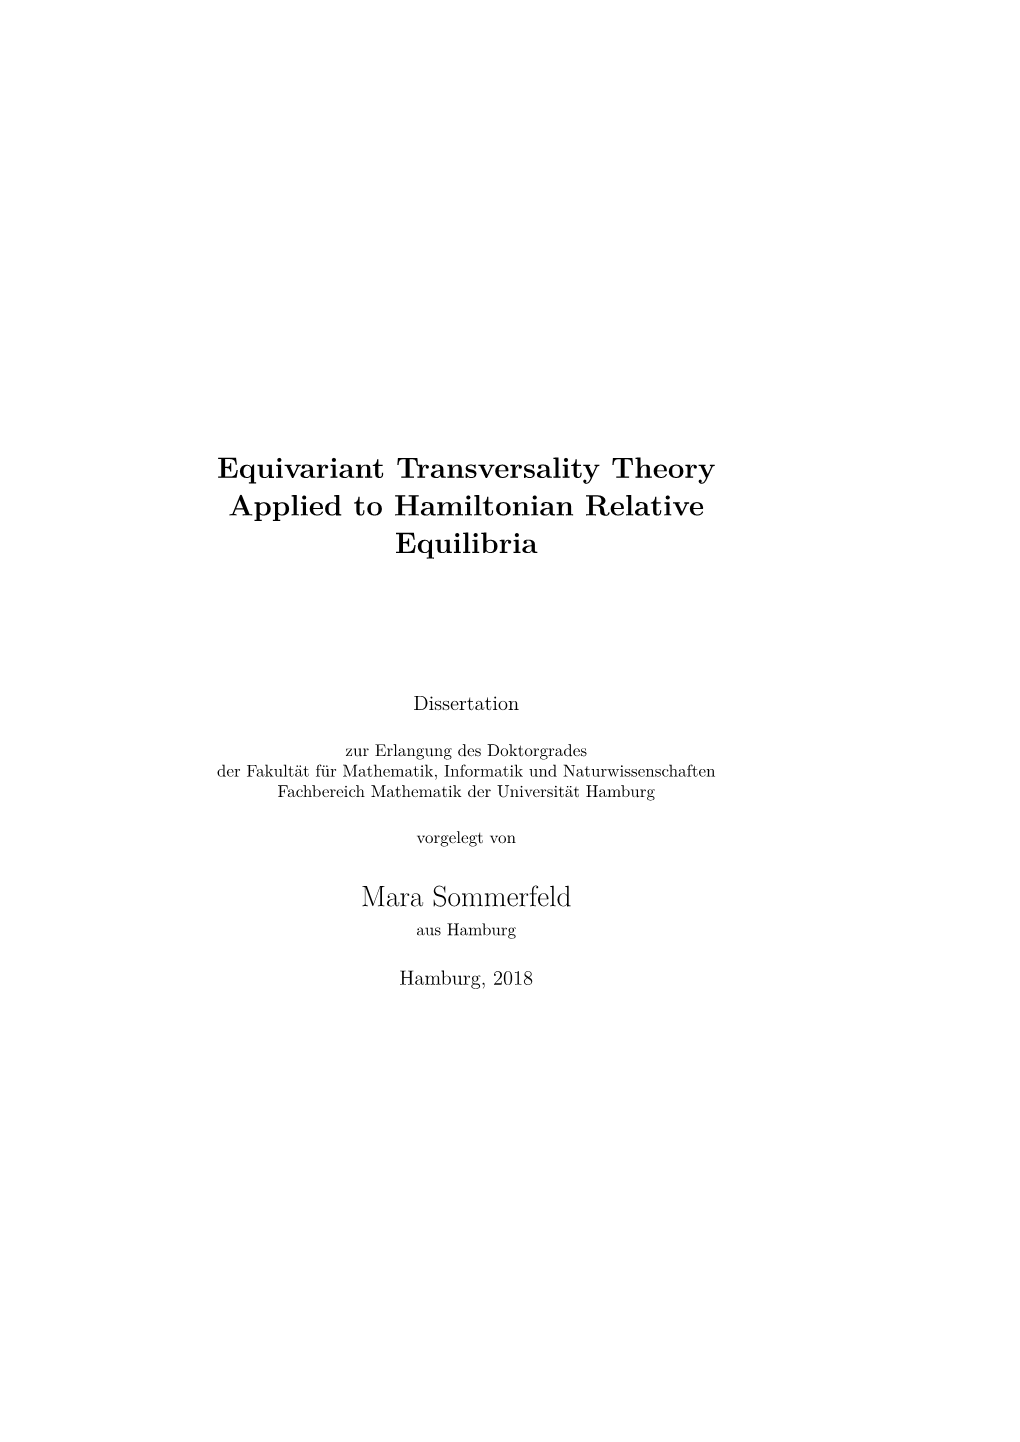 Equivariant Transversality Theory Applied to Hamiltonian Relative Equilibria